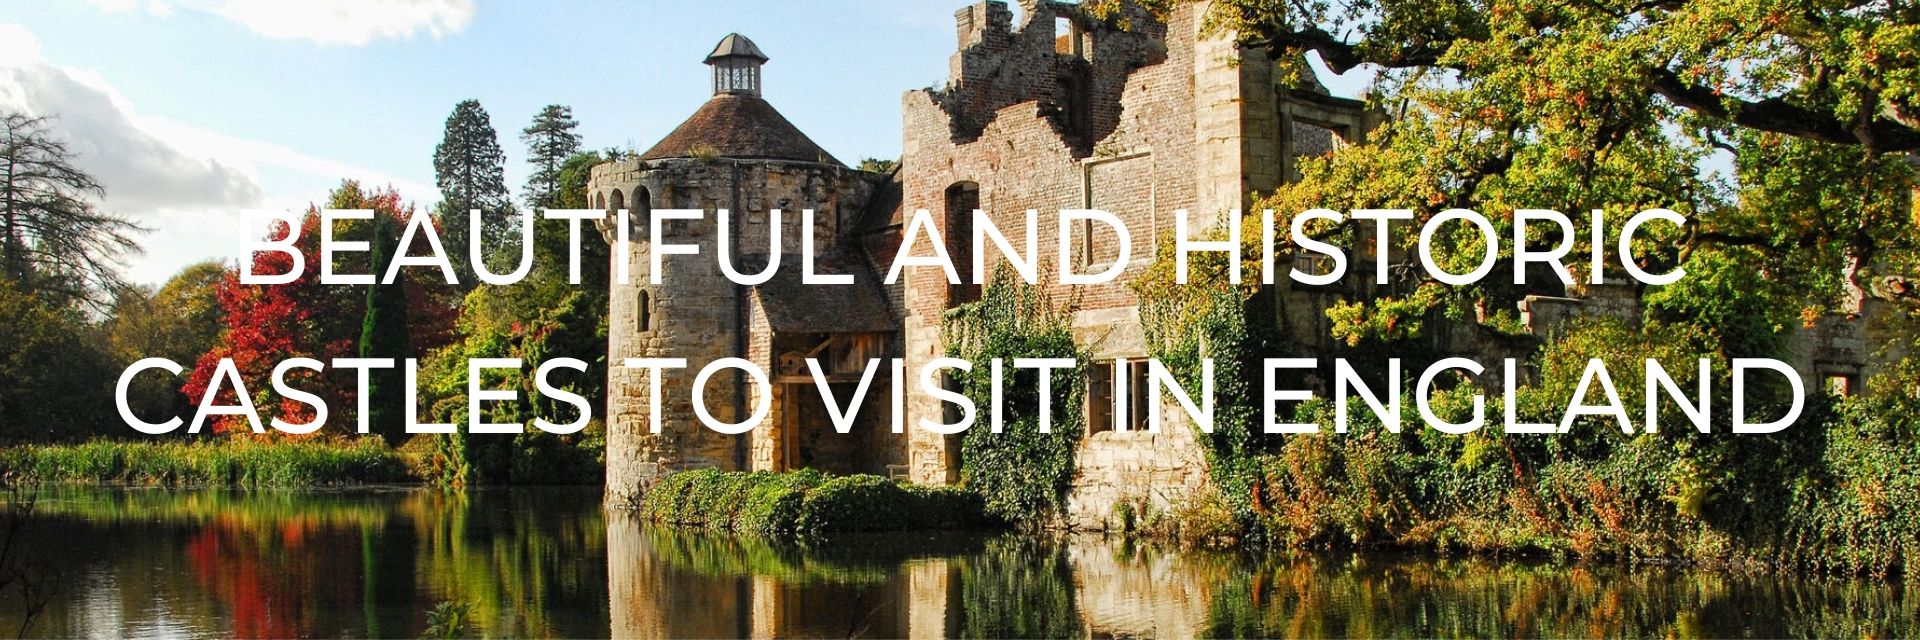 Beautiful and Historic Castles to Visit in England - Desktop Header